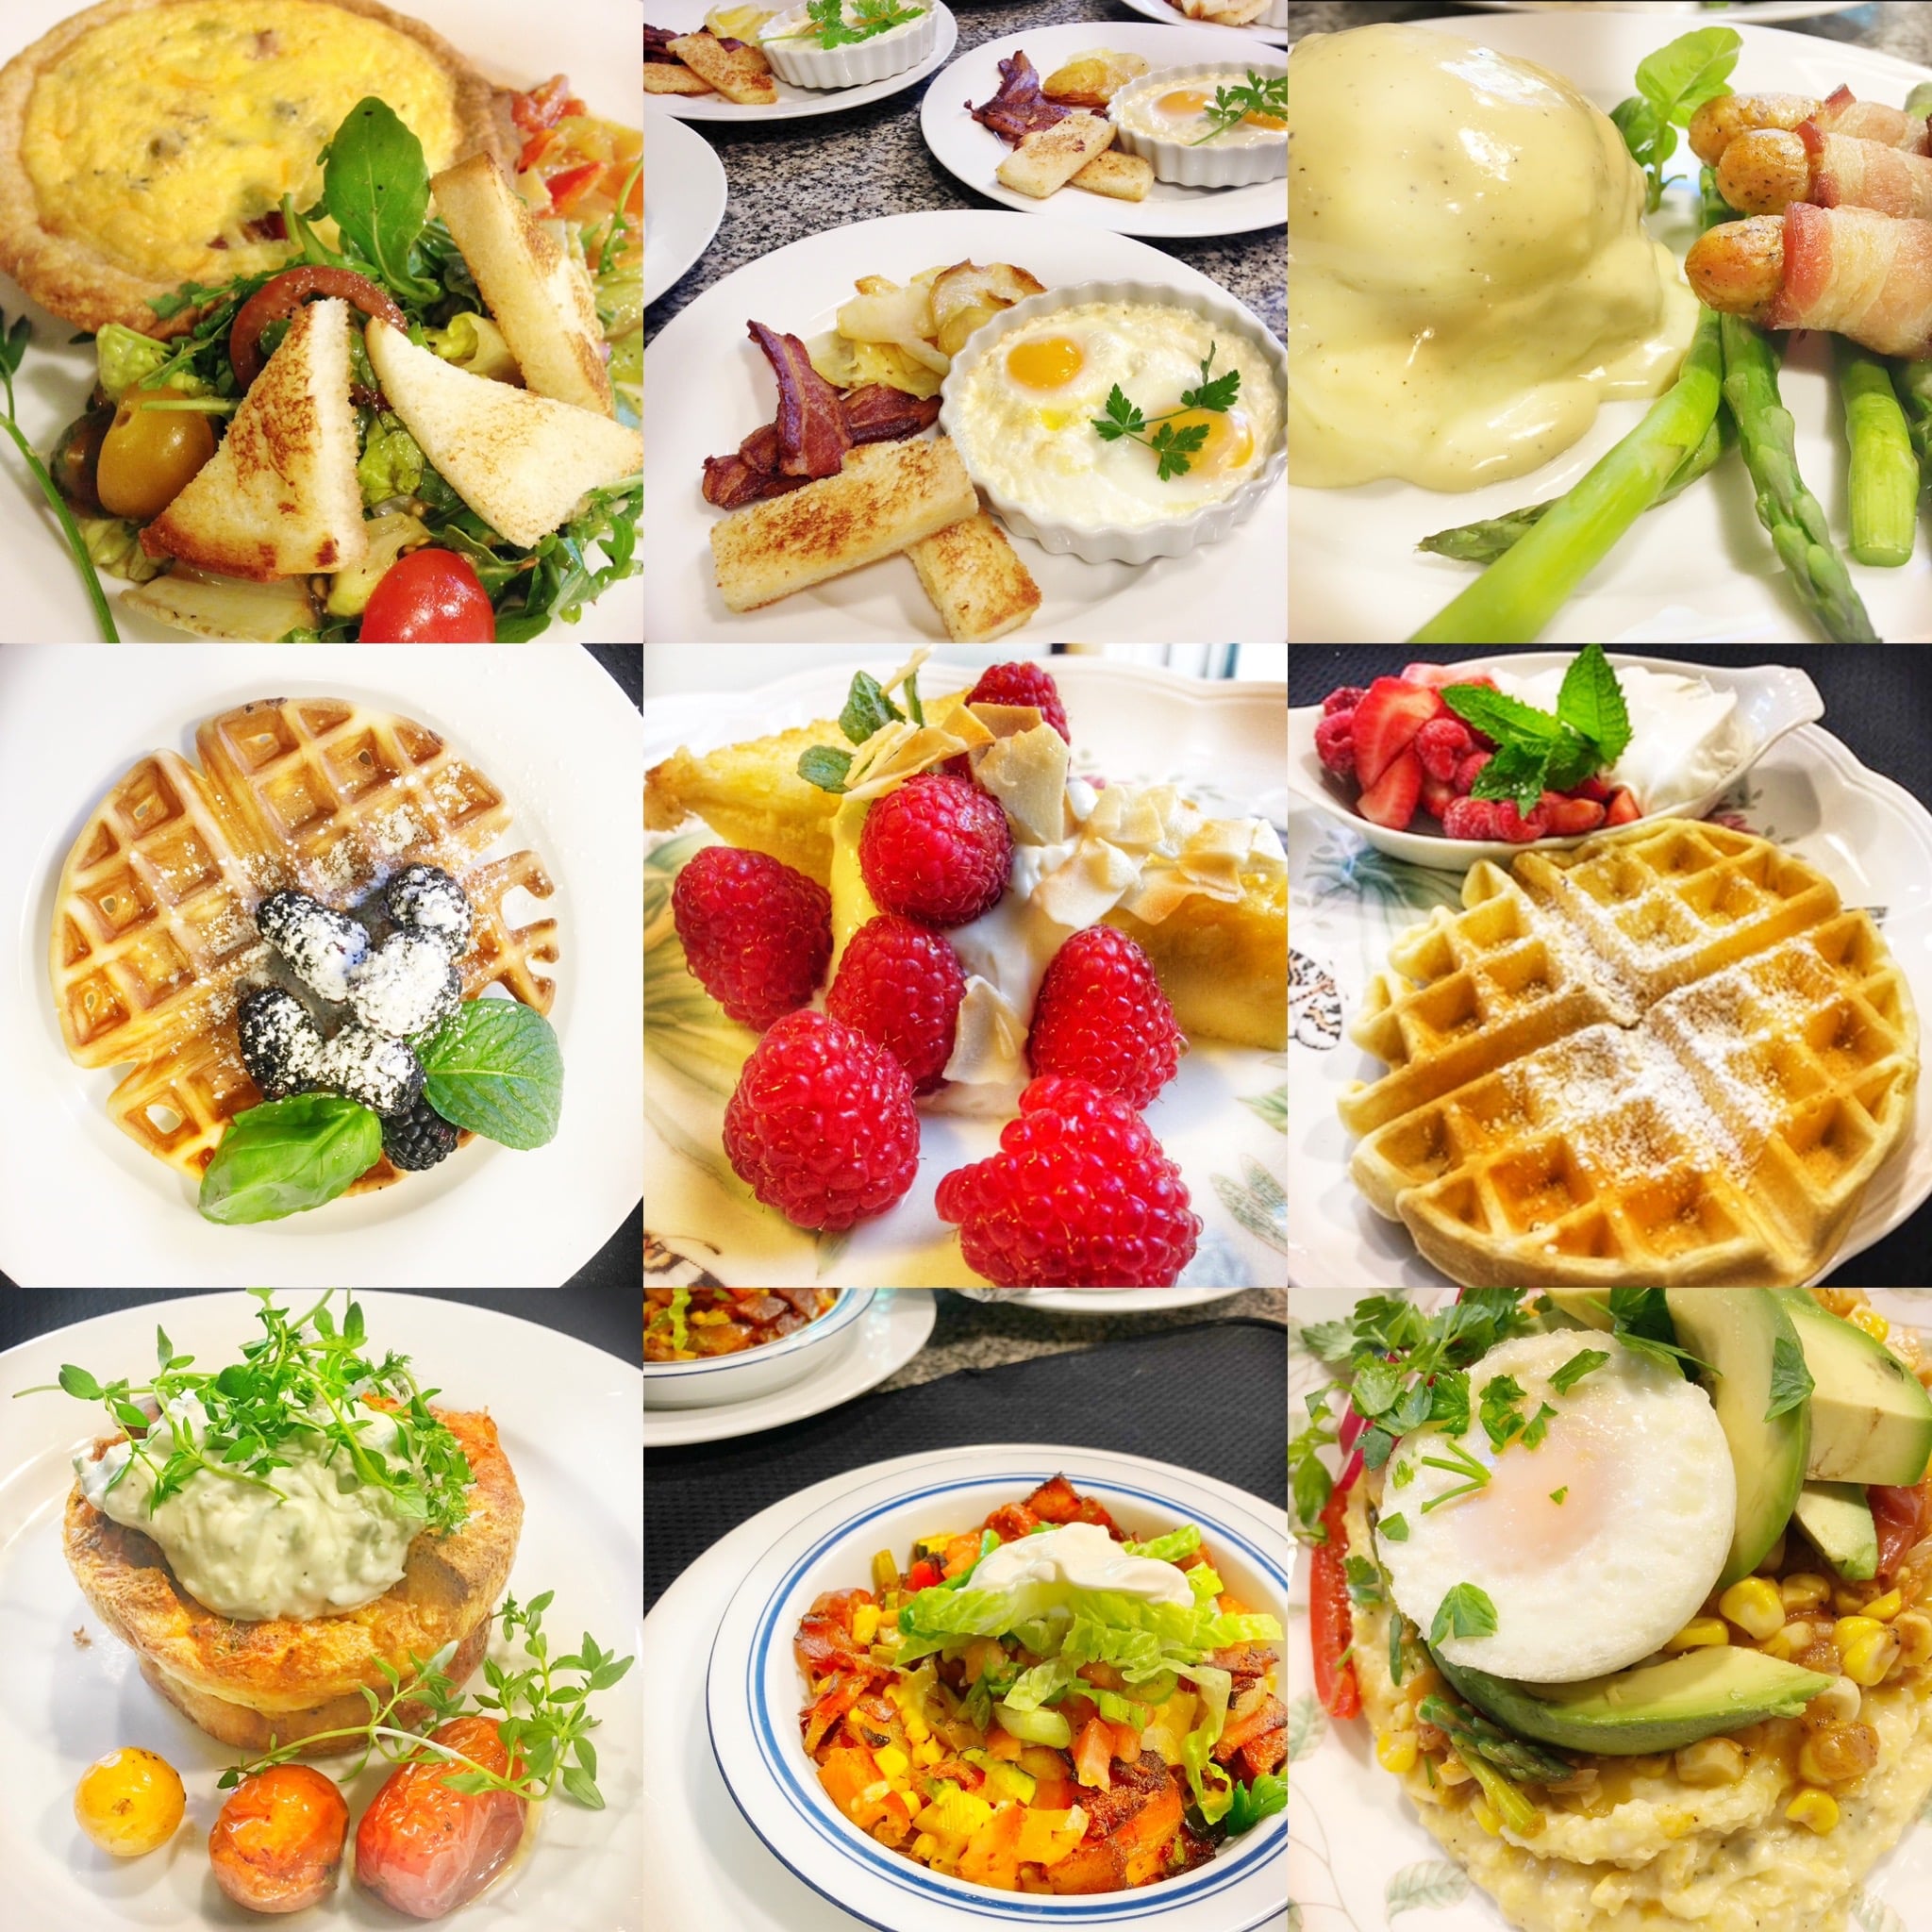 A Selection of Breakfast Dishes with eggs and bacon